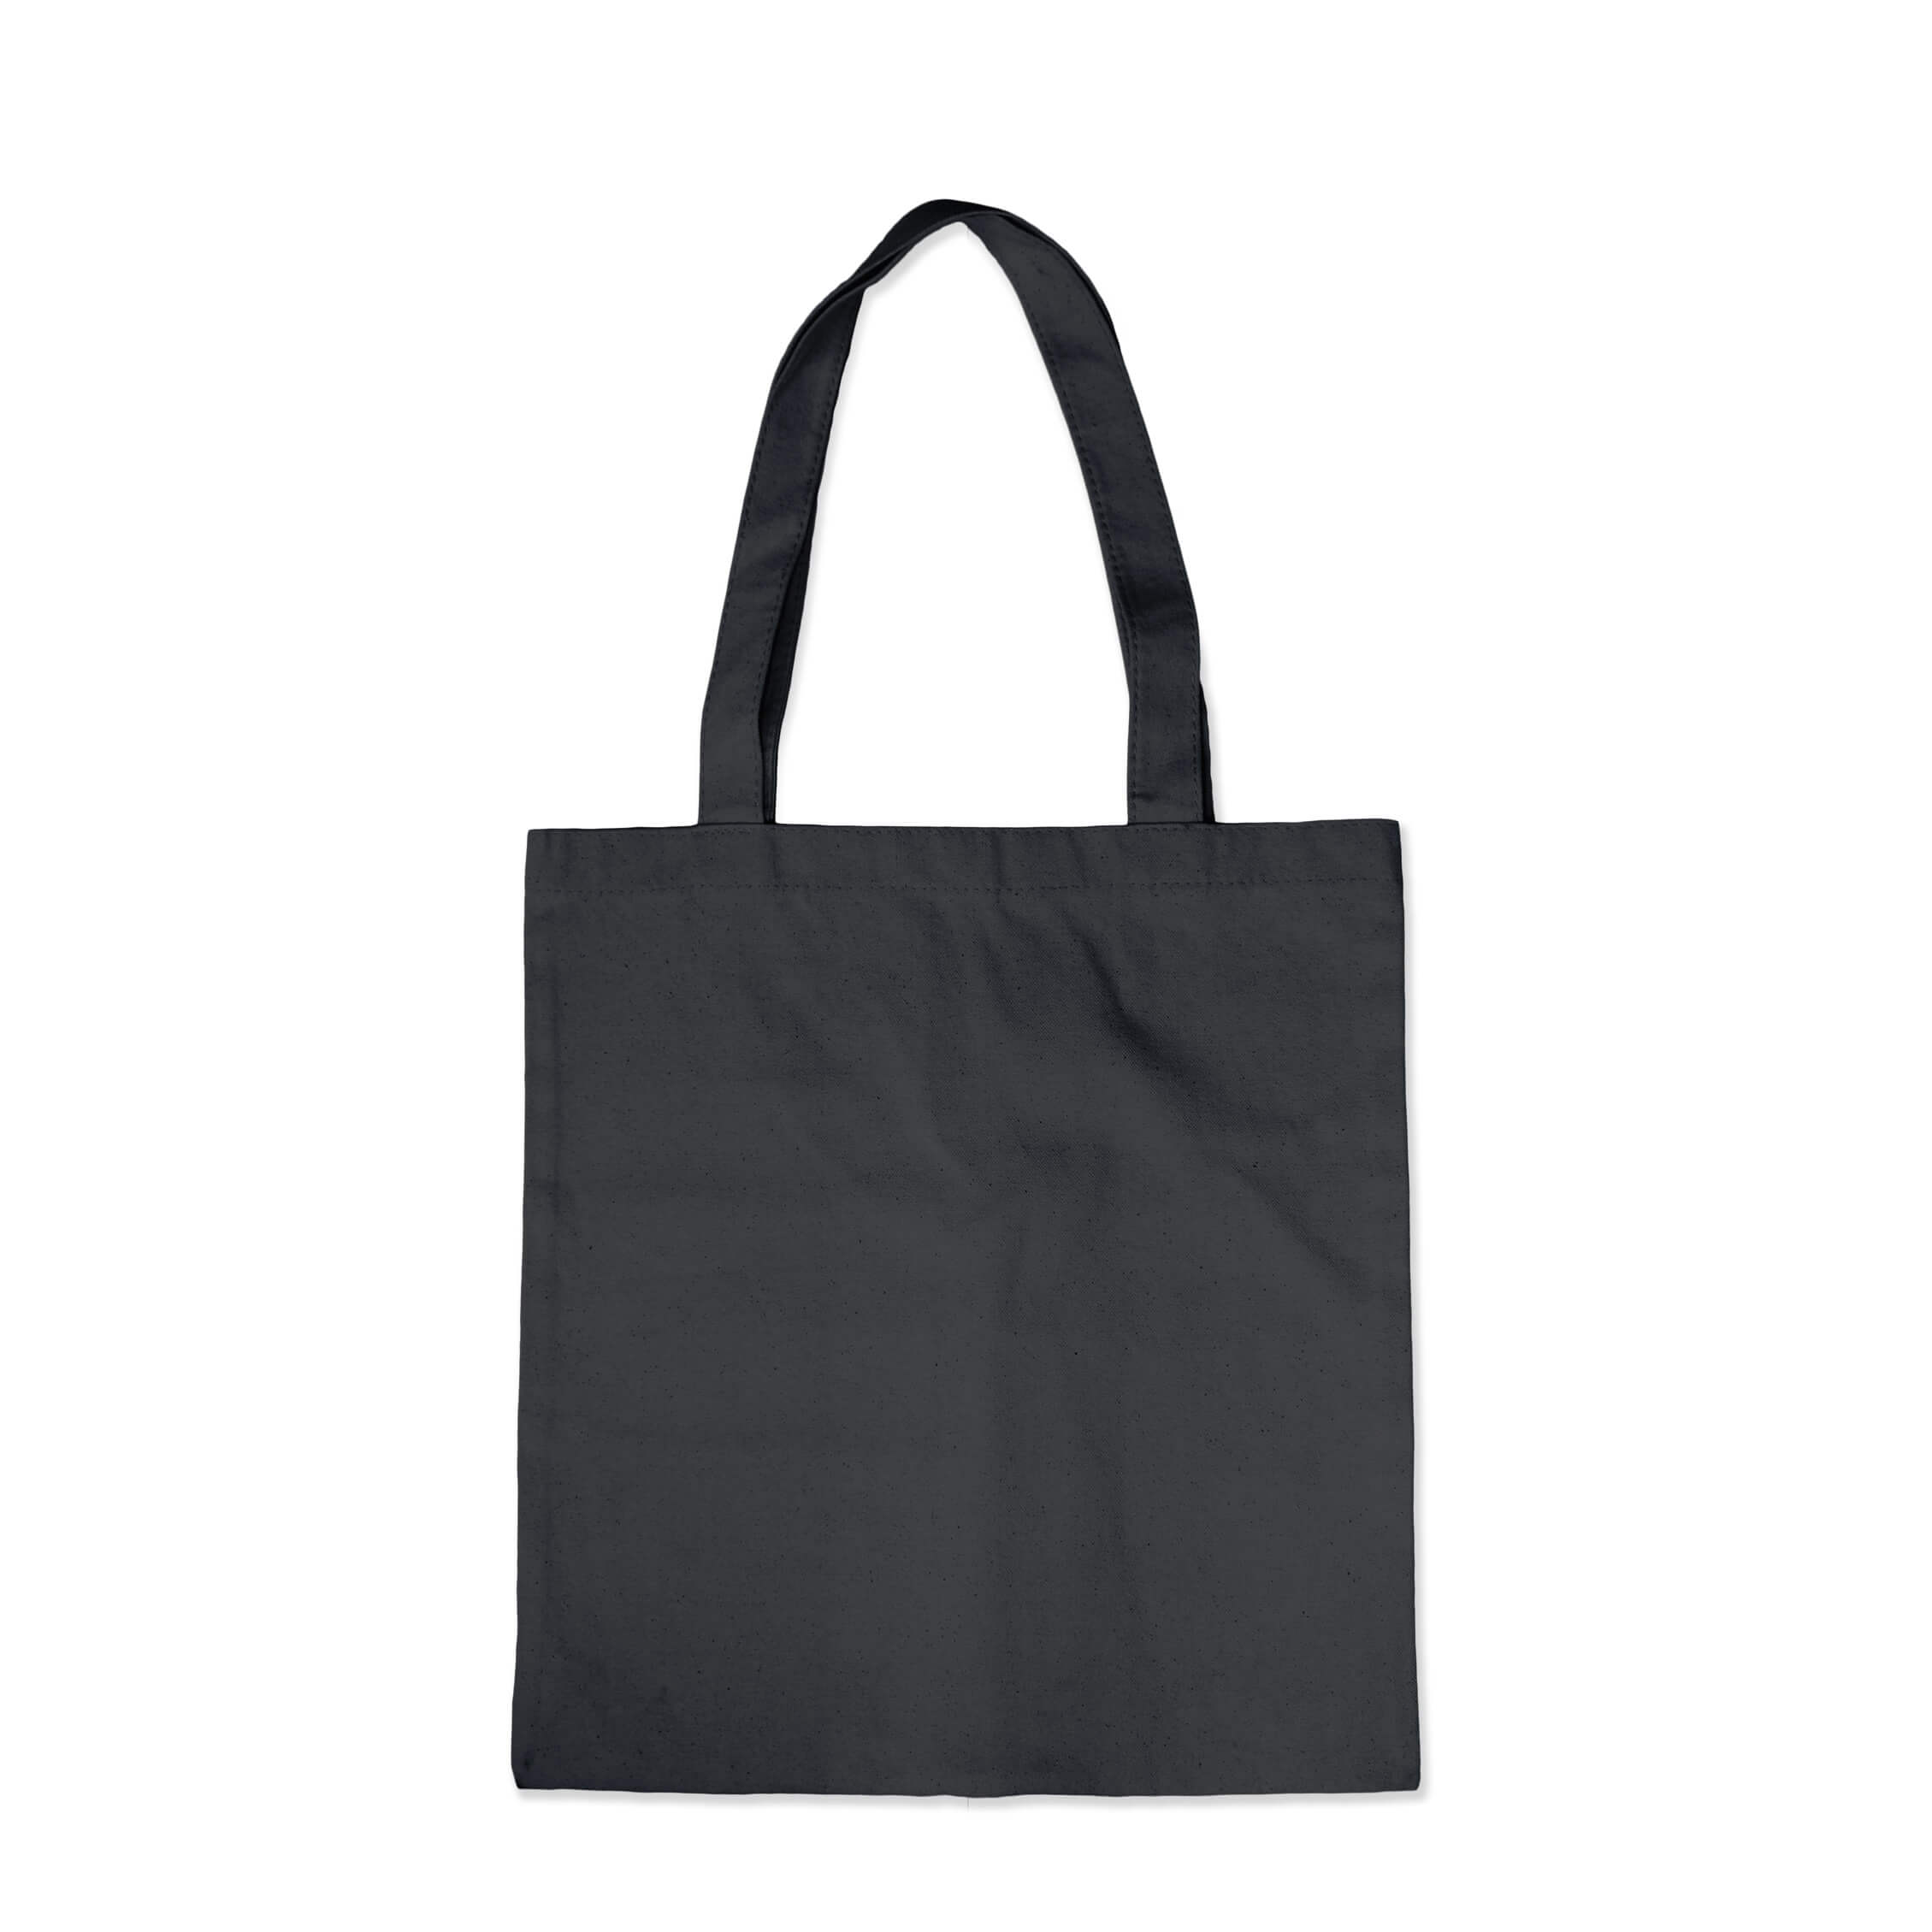 Customizable Cotton Canvas Bags | IUCN Water